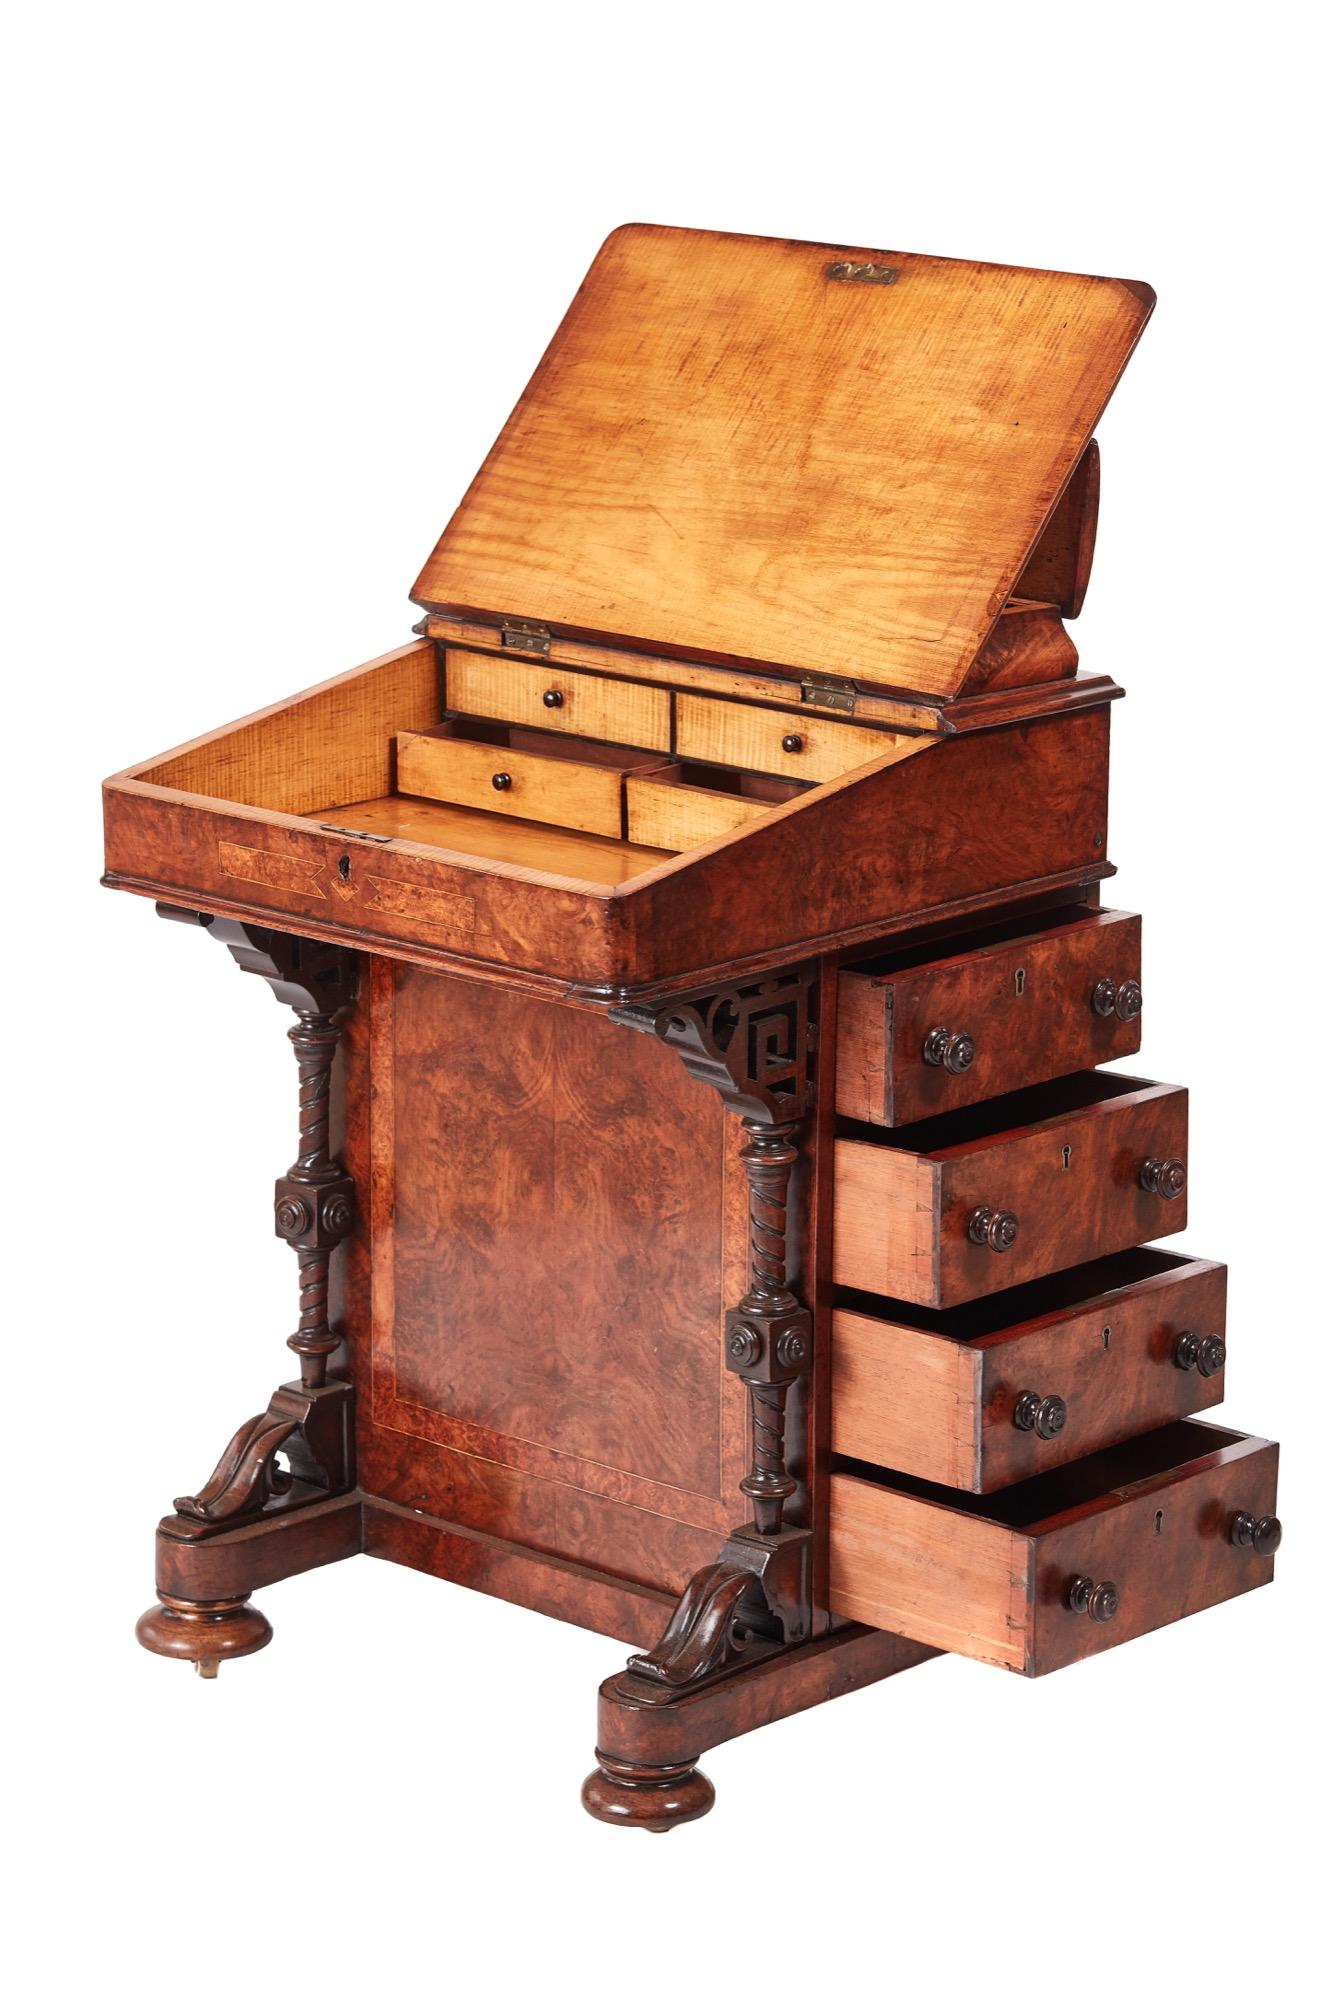 Quality Victorian burr walnut freestanding inlaid davenport, lift up lid with a fitted interior, carved shaped and turned supports to the front, the right side has four drawers with original knobs, the left side has four false drawers with original